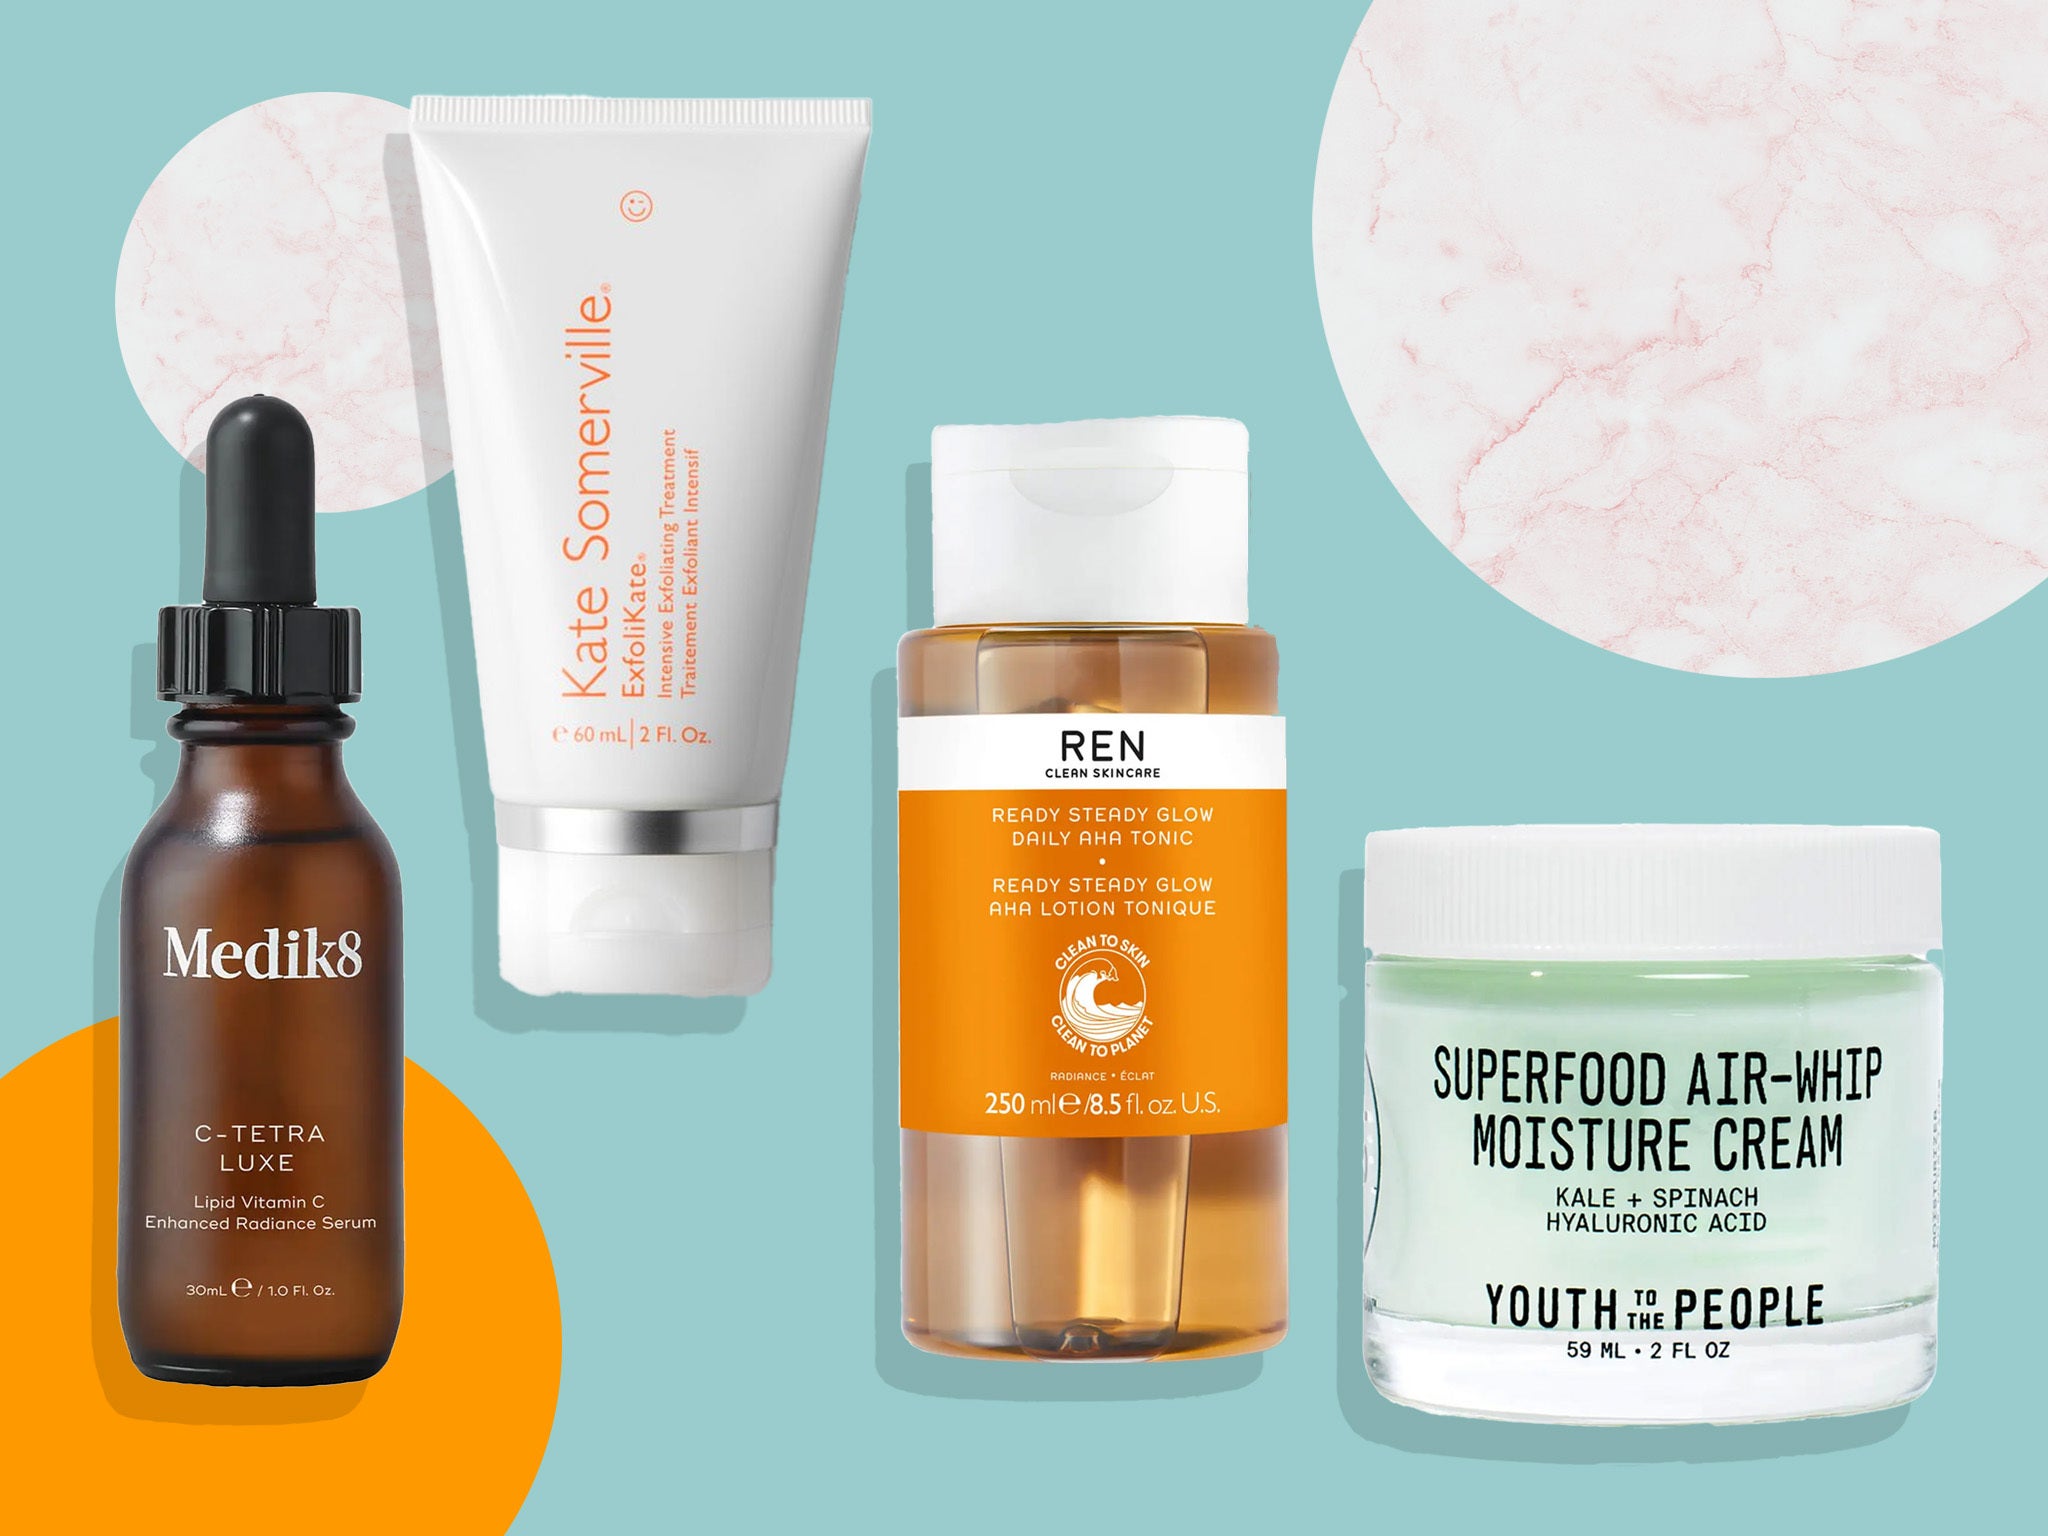 This is Cult Beauty’s highest value goody bag so far